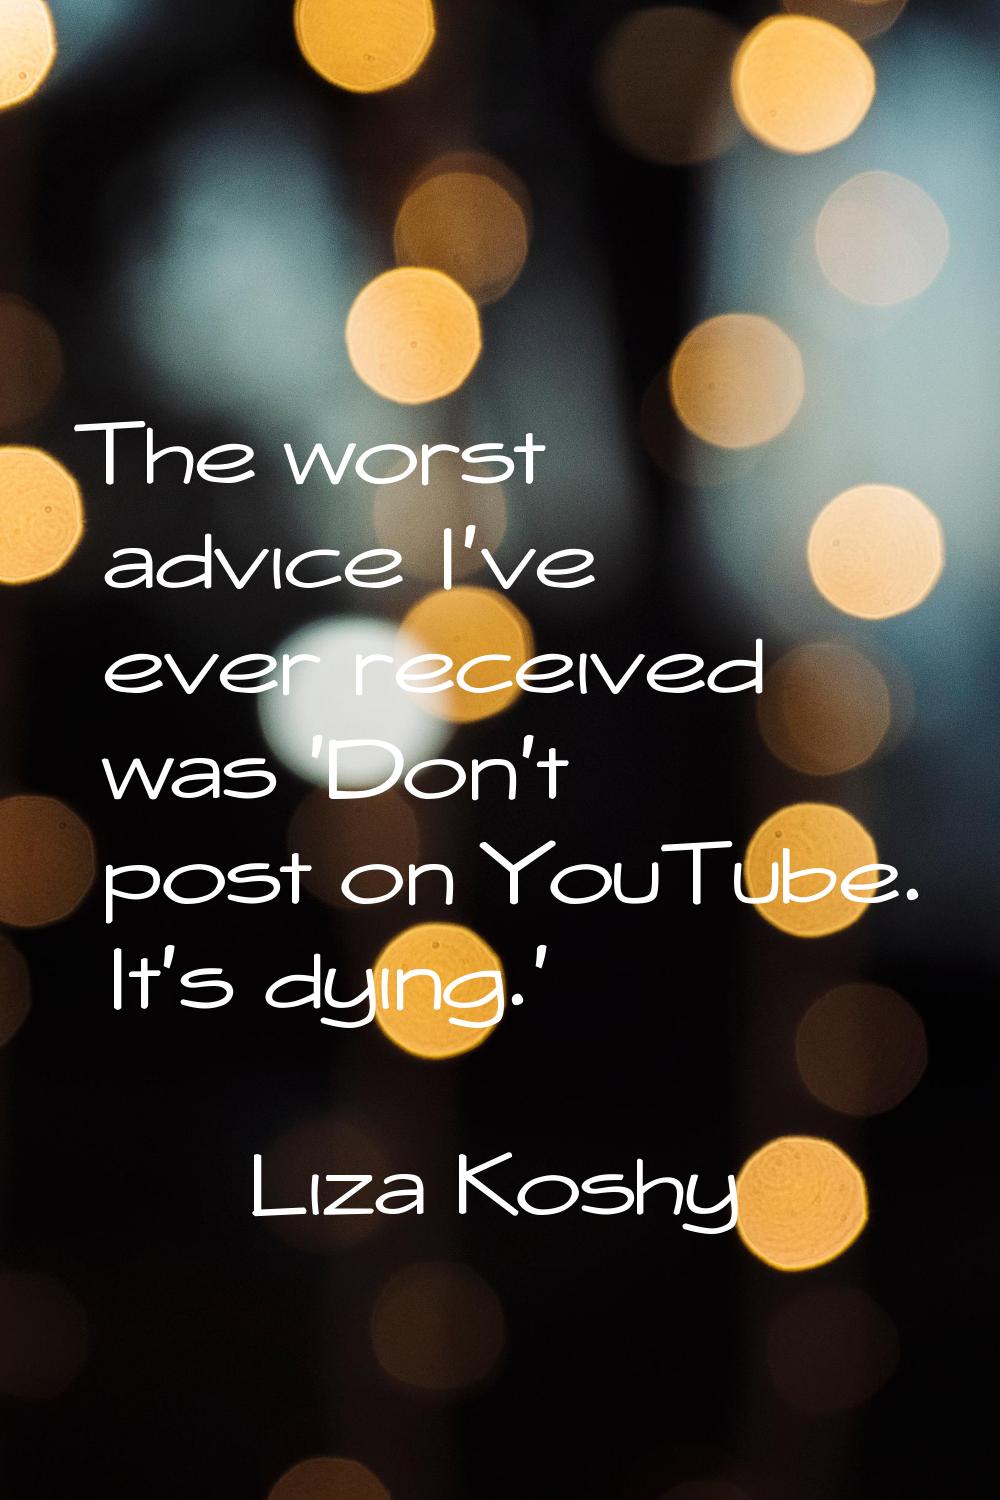 The worst advice I've ever received was 'Don't post on YouTube. It's dying.'